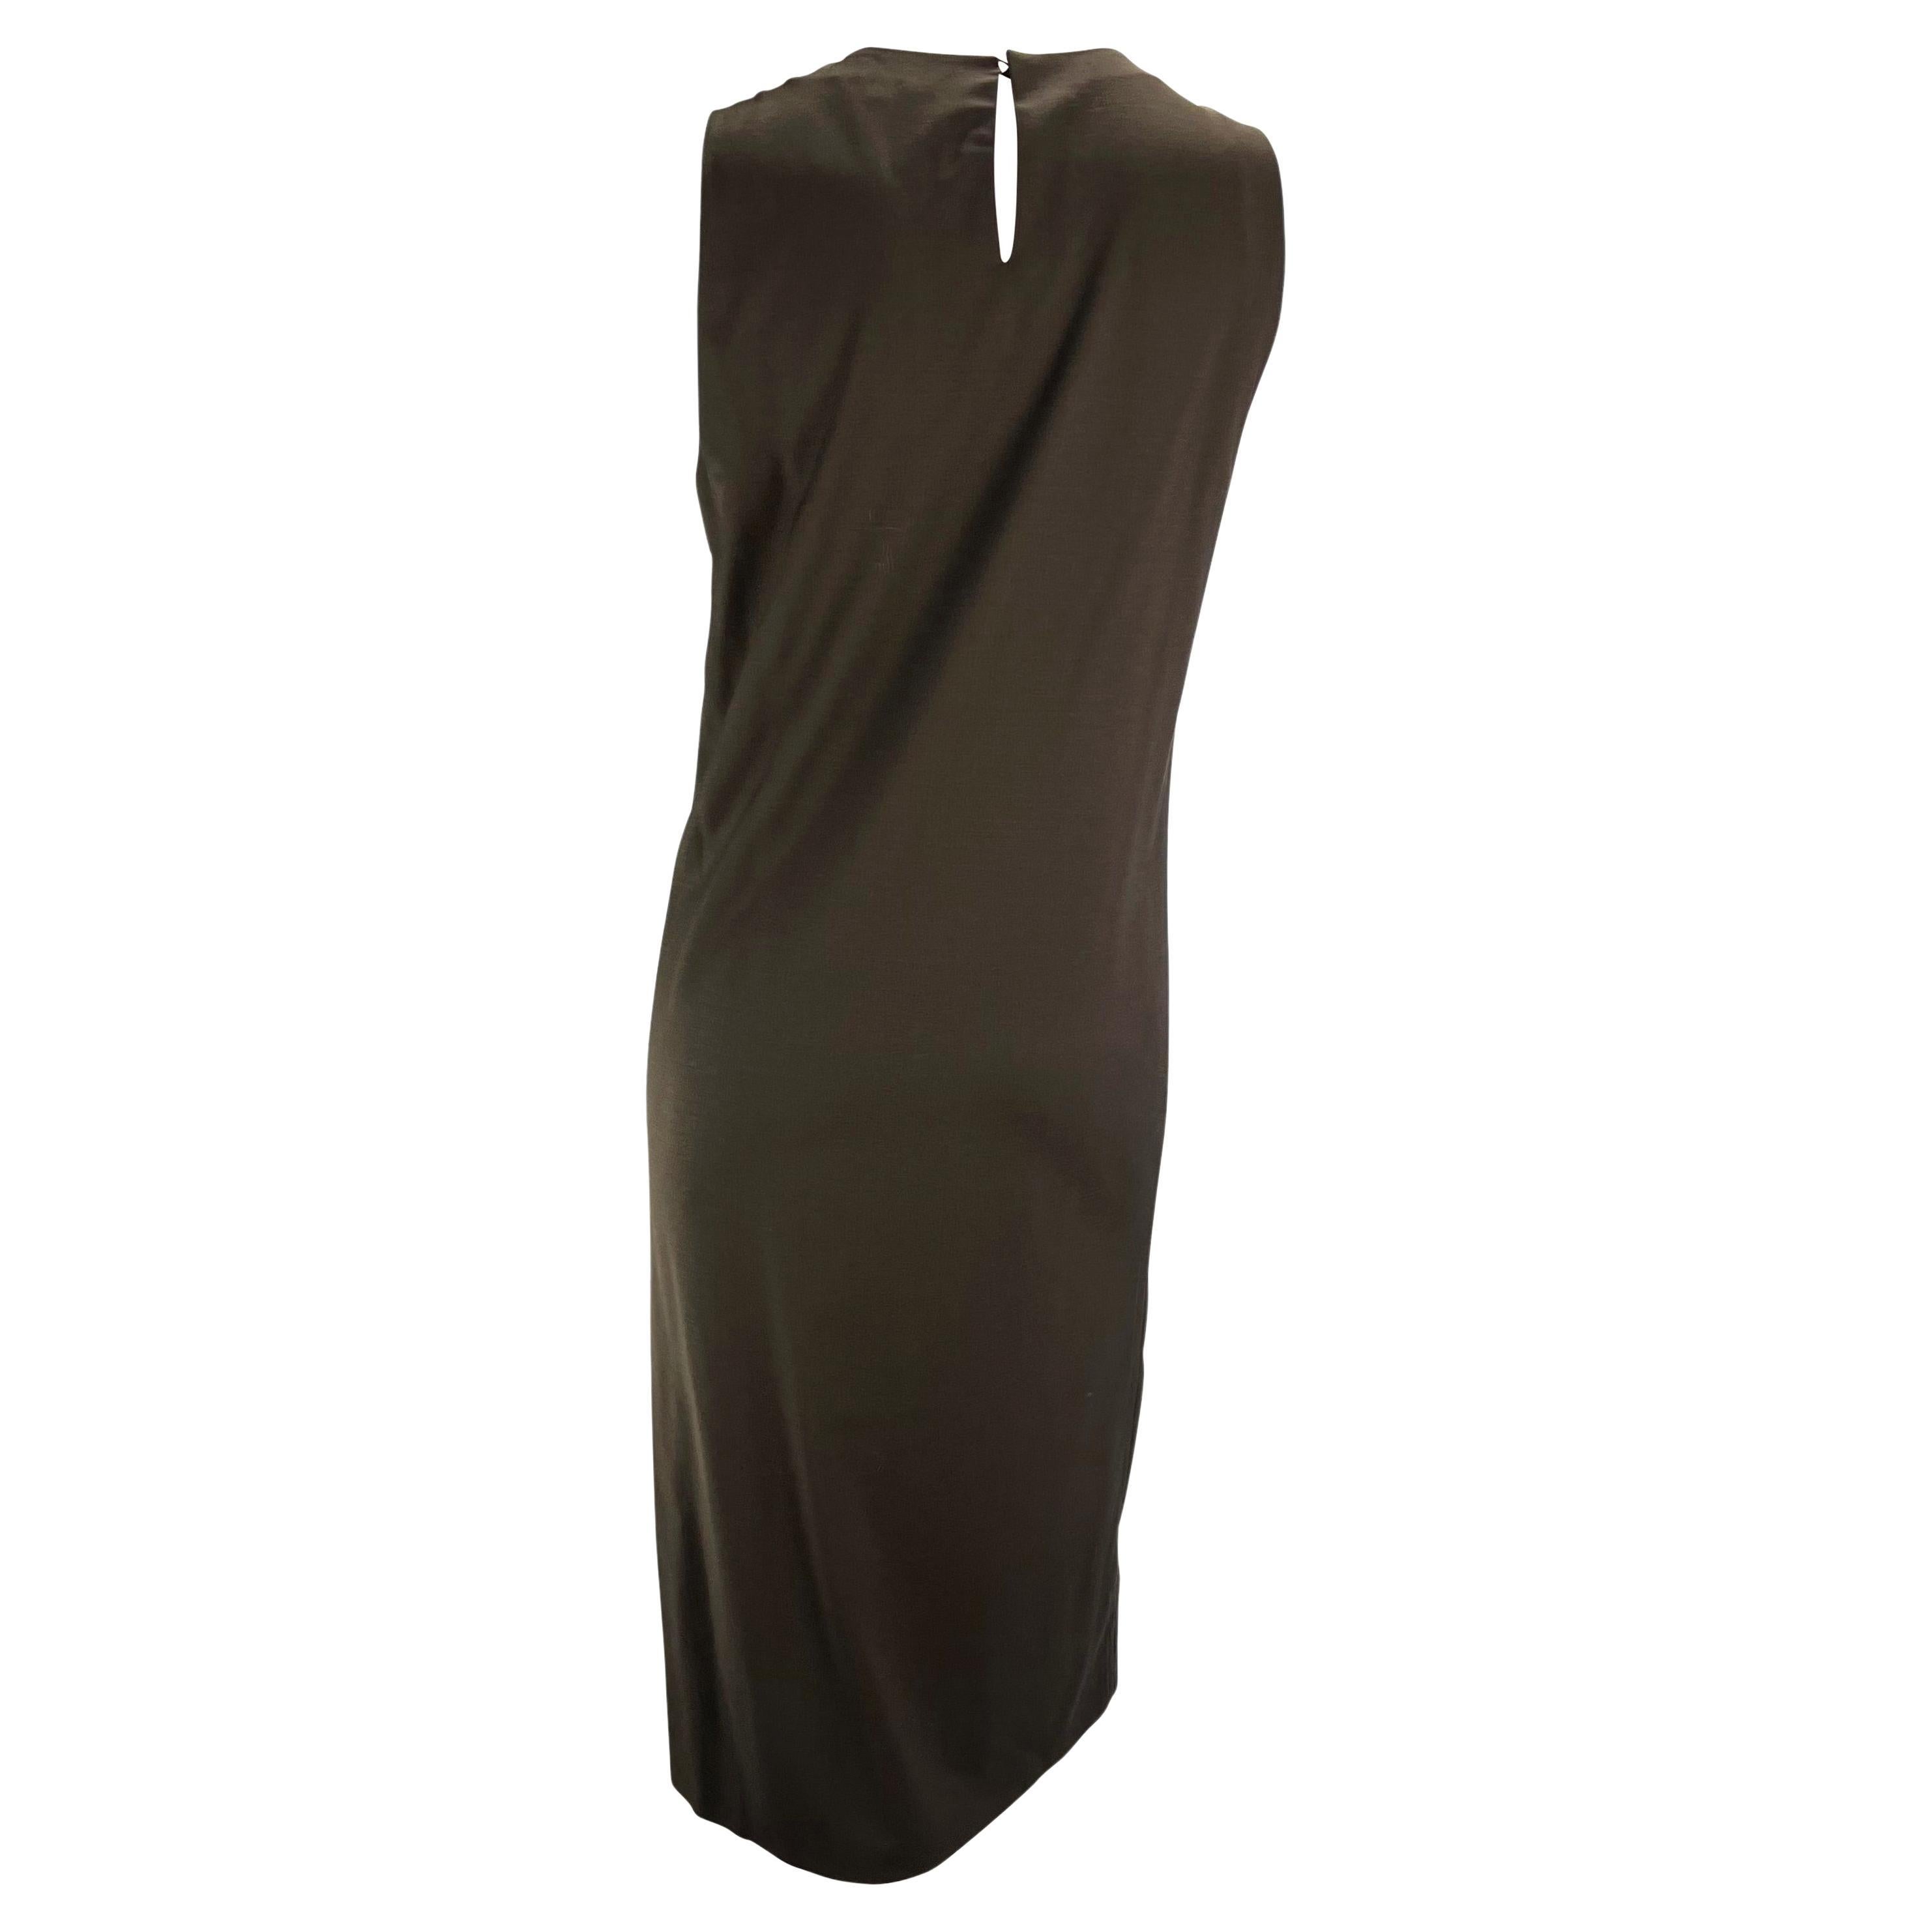 S/S 1997 Gucci by Tom Ford Brown Sleeveless Shift Dress Keyhole Back In Excellent Condition For Sale In West Hollywood, CA